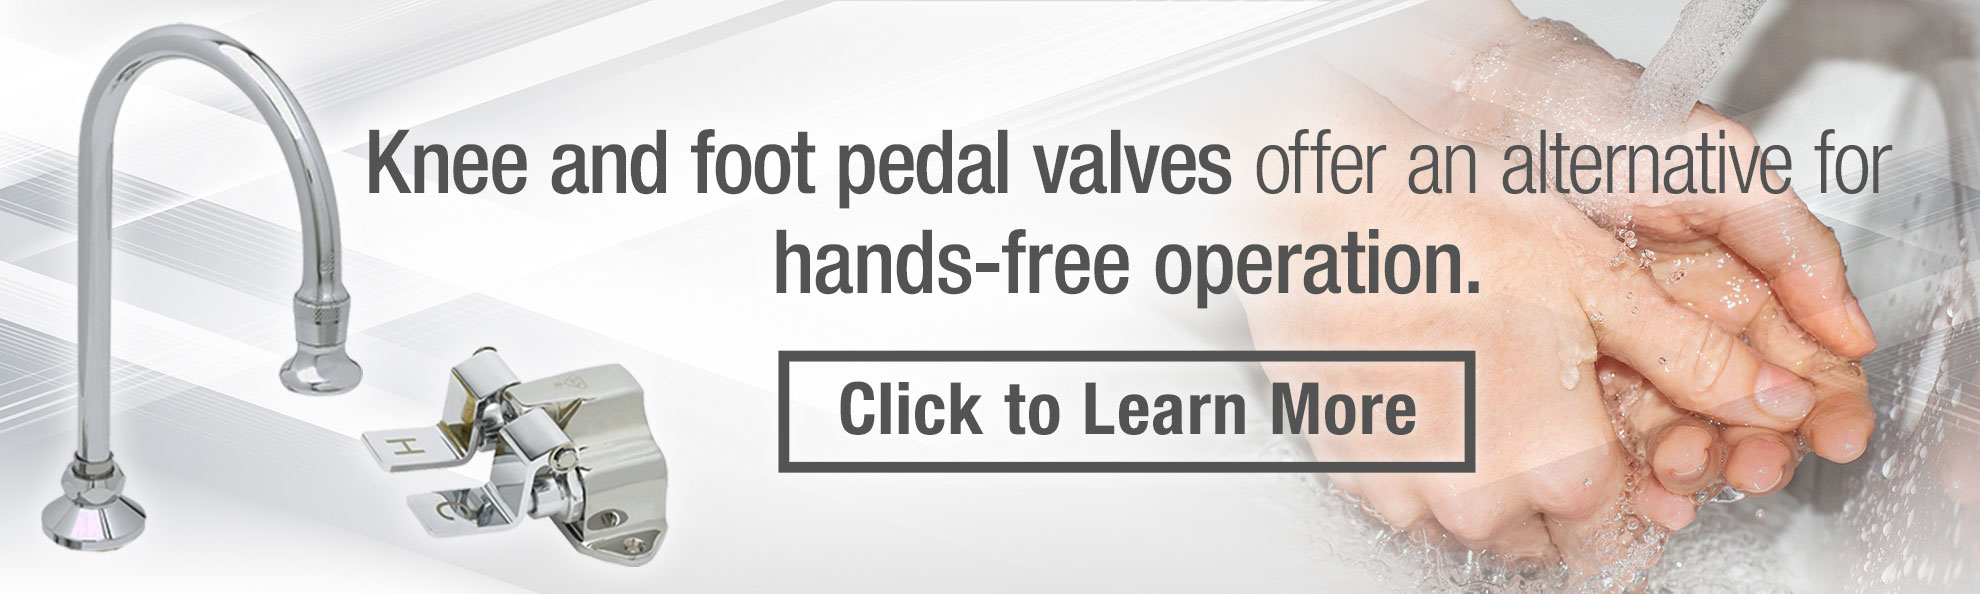 Knee and pedal valves offer an alternative for hands-free operation